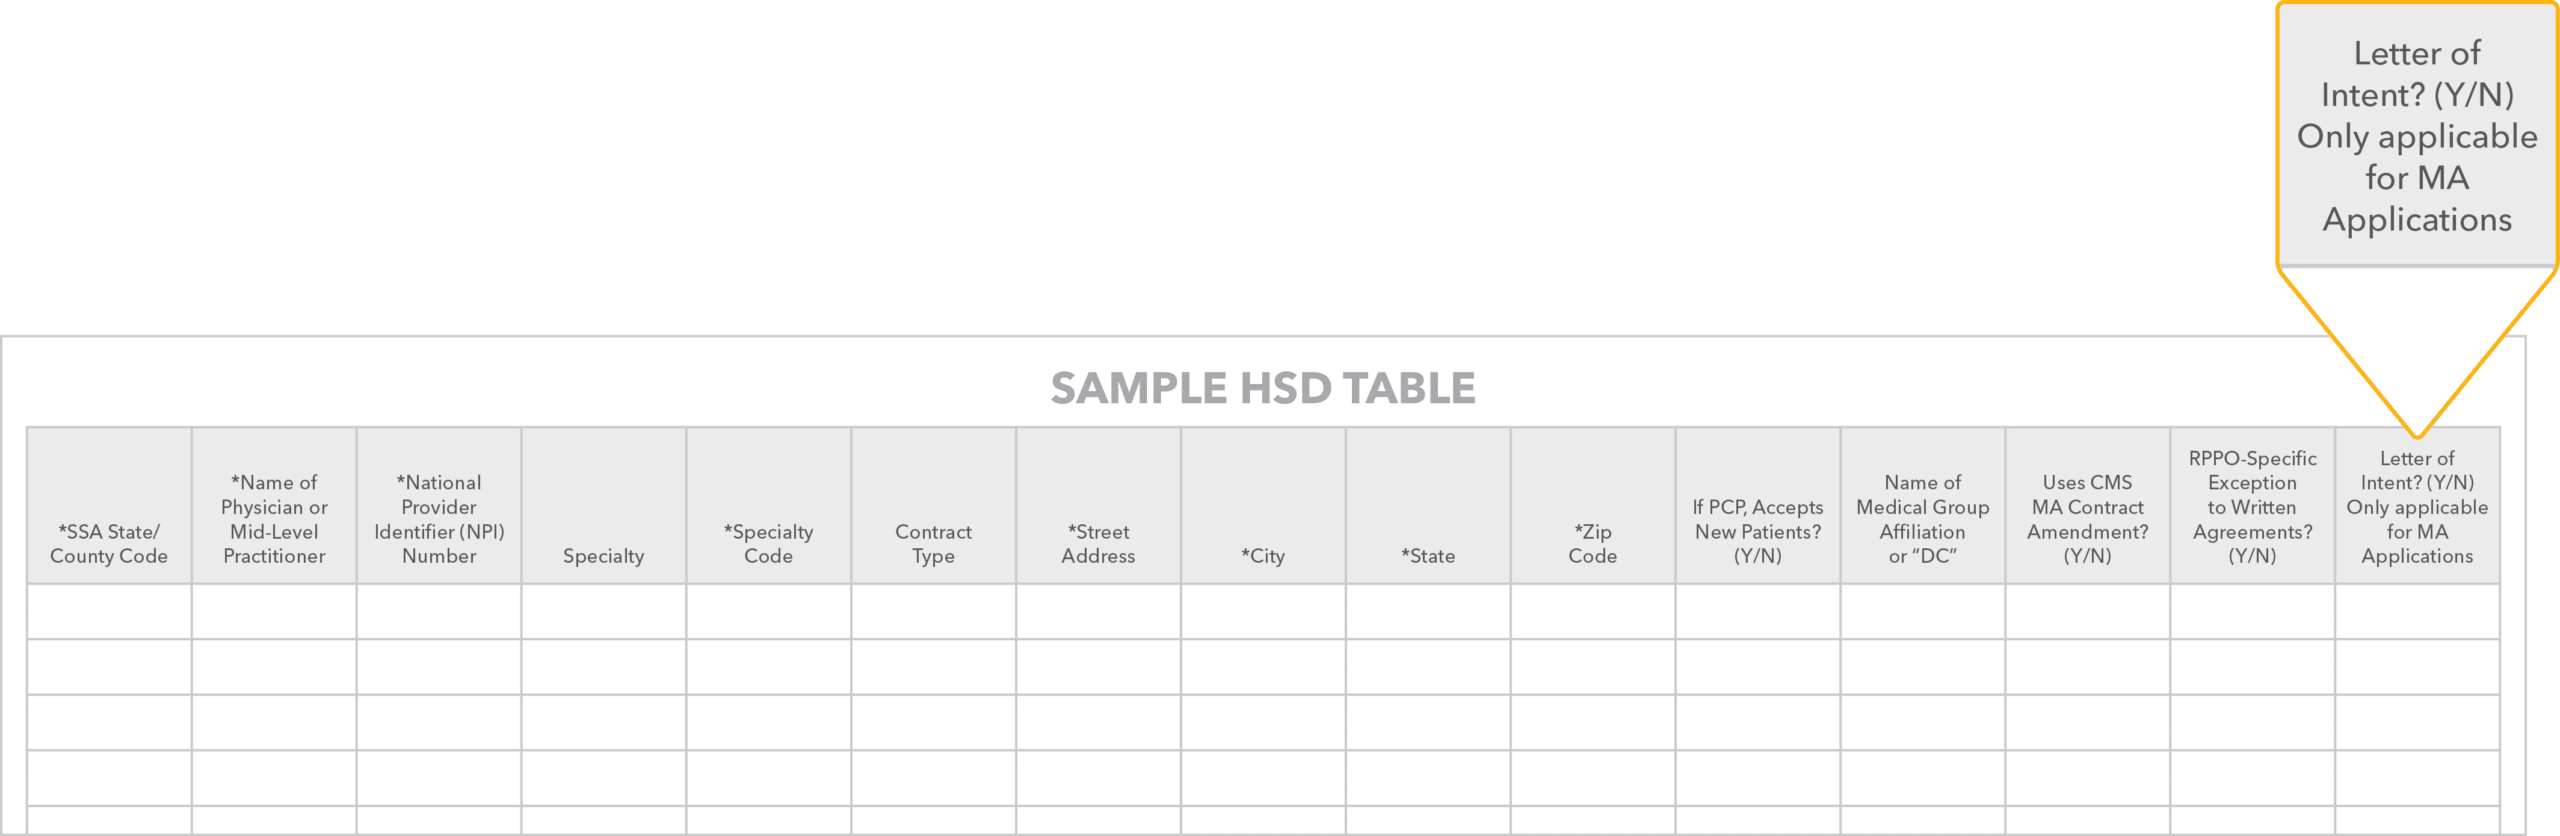 Sample HSD Table Column Letter of Intent? (Y/N) Only applicable for MA Application